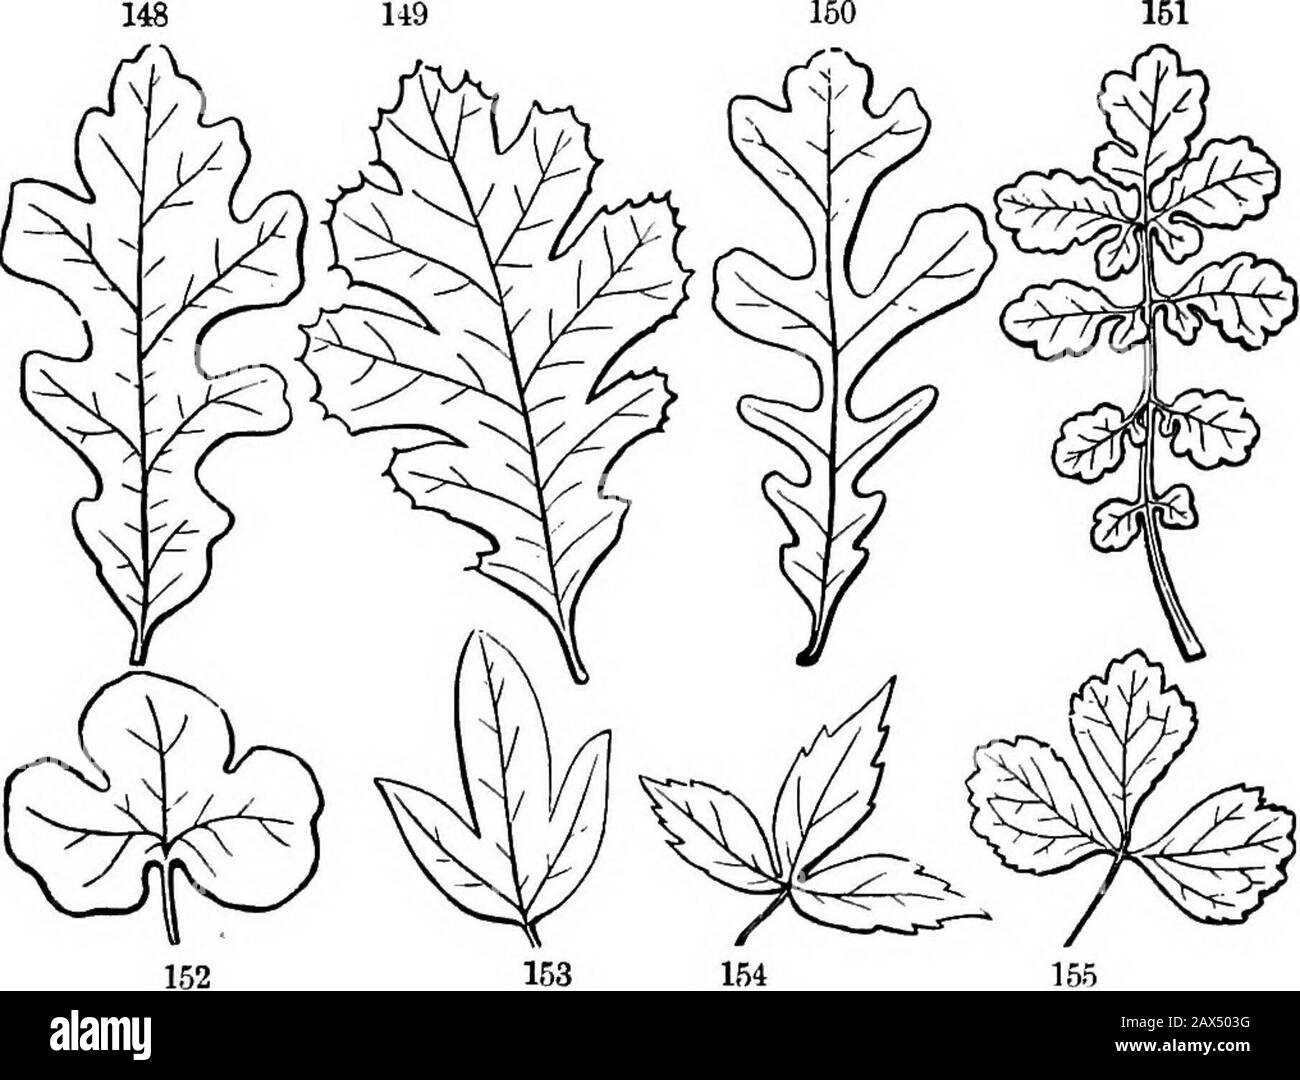 The elements of botany for beginners and for schools . former thenotches or incisions, or sinuses, coming between the principal veins or ribsare directed toward the midrib : in the latter they are directed toward theapex of tiie petiole ; as the figures show. 142. So degree and mode of division may be tersely expressed in briefphrases. Thus, in the four upper figures of pinnately veined leaves, thefirst is said to be pinnately lobed (in the special sense), the second pinnatelycleft (or pinnatifid in Latin form), the third pinnately parted, the fourthpinnately divided, or pinnatisected. 143. Co Stock Photo